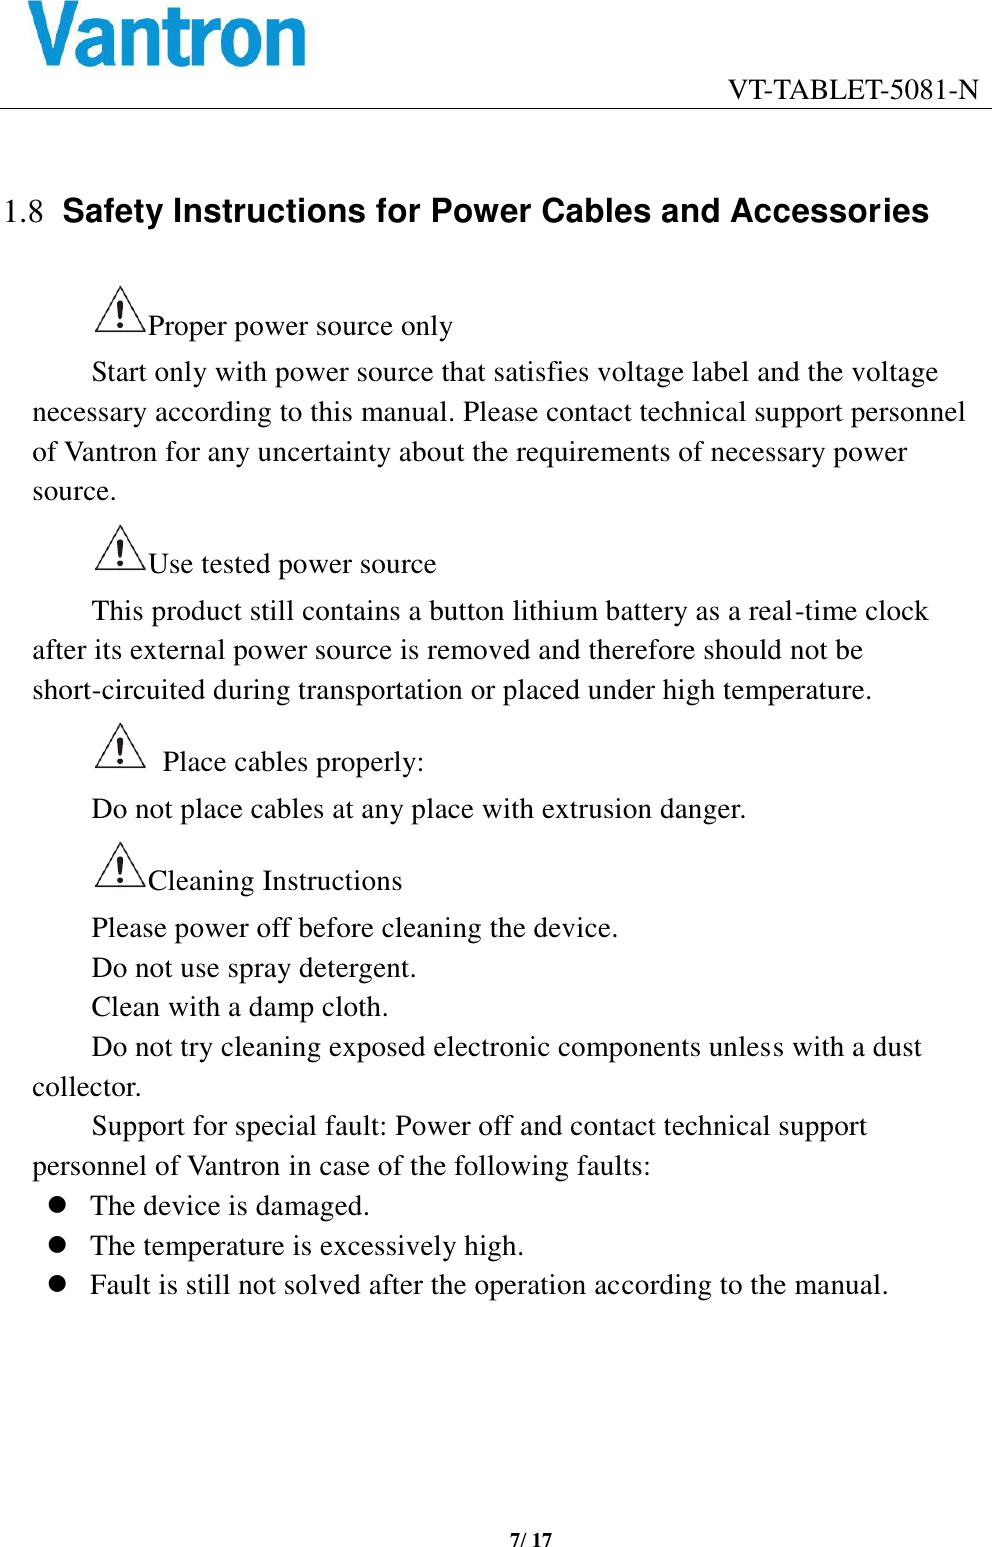                                    VT-TABLET-5081-N 7/ 17   1.8 Safety Instructions for Power Cables and Accessories Proper power source only Start only with power source that satisfies voltage label and the voltage necessary according to this manual. Please contact technical support personnel of Vantron for any uncertainty about the requirements of necessary power source.   Use tested power source   This product still contains a button lithium battery as a real-time clock after its external power source is removed and therefore should not be short-circuited during transportation or placed under high temperature.     Place cables properly: Do not place cables at any place with extrusion danger.   Cleaning Instructions Please power off before cleaning the device. Do not use spray detergent.   Clean with a damp cloth. Do not try cleaning exposed electronic components unless with a dust collector.   Support for special fault: Power off and contact technical support personnel of Vantron in case of the following faults: ⚫ The device is damaged. ⚫ The temperature is excessively high.   ⚫ Fault is still not solved after the operation according to the manual.     